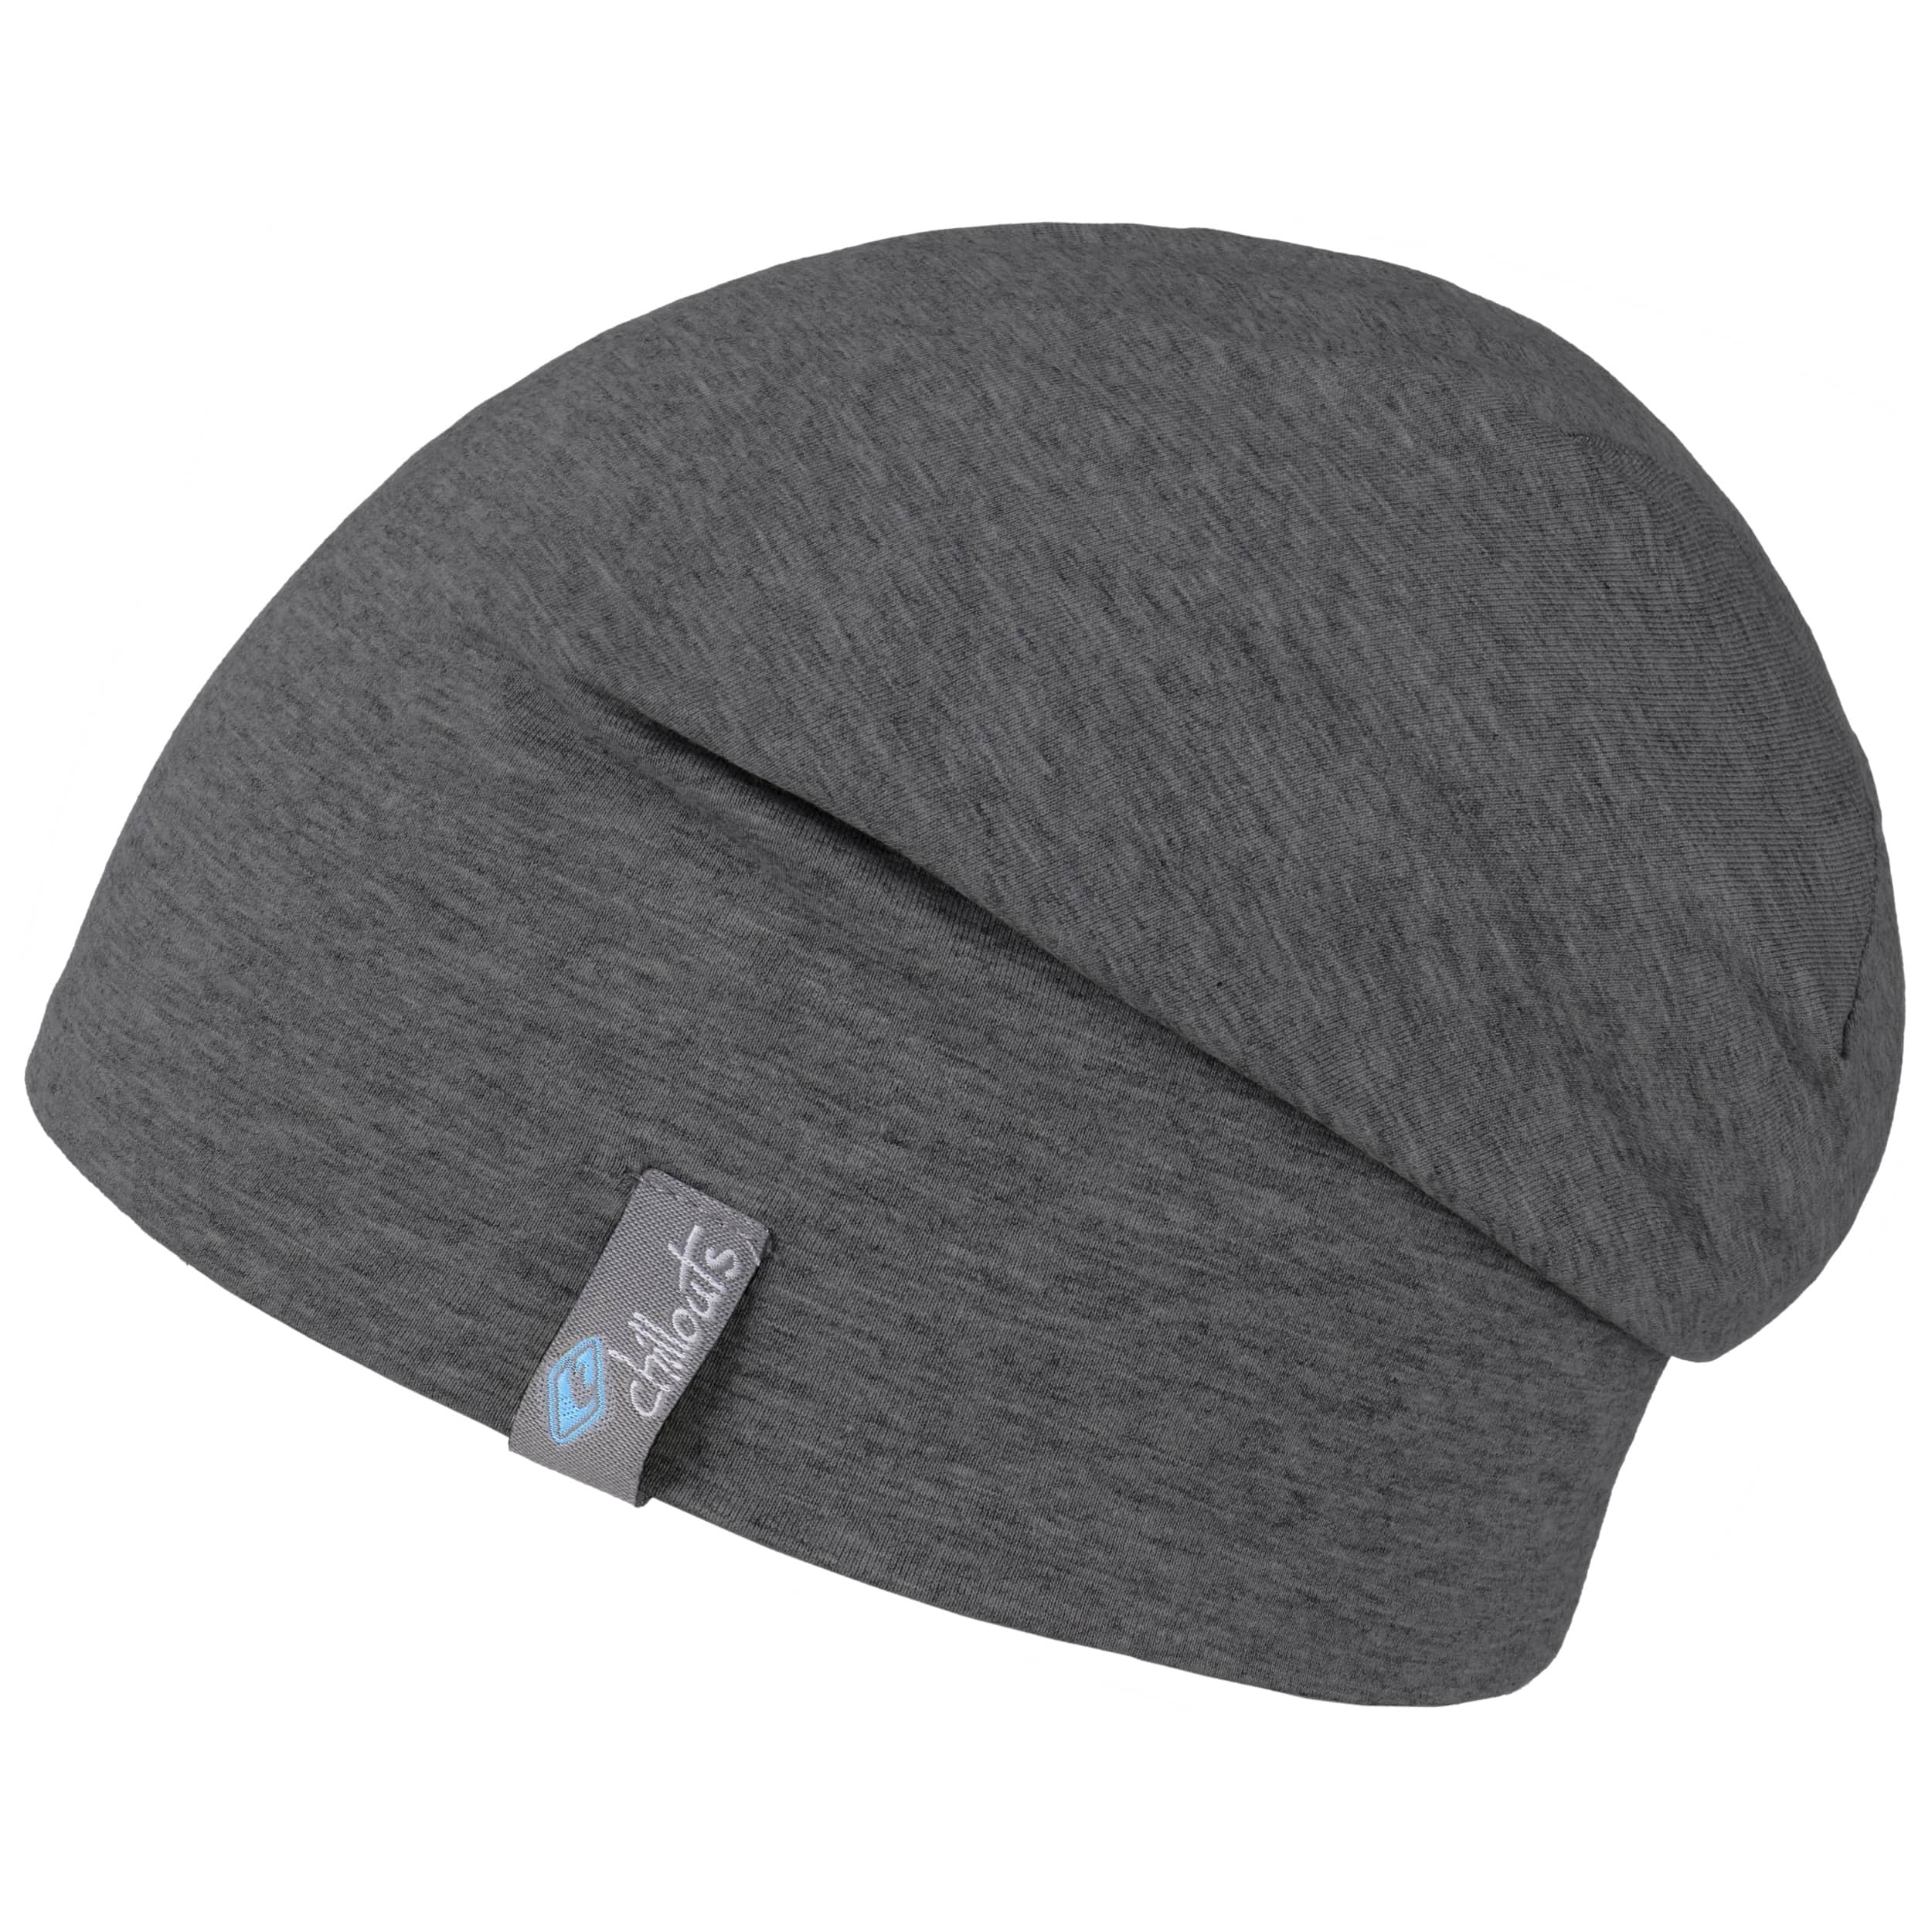 --> ▷ Hats, Beanies & Oversize Beanie online Caps Acapulco Chillouts Hatshopping by Shop